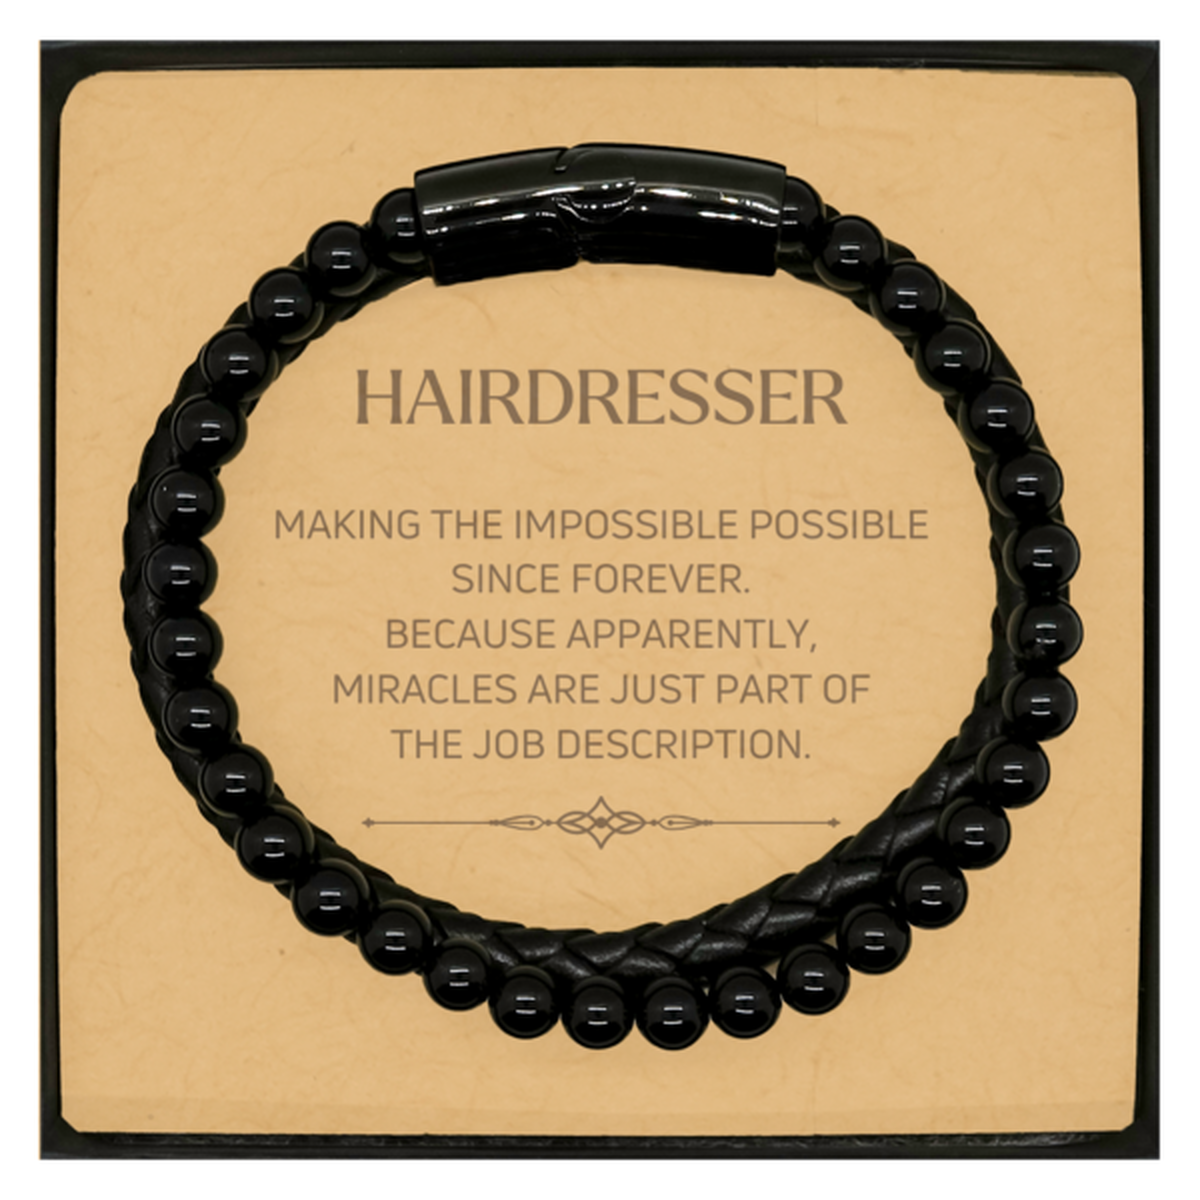 Funny Hairdresser Gifts, Miracles are just part of the job description, Inspirational Birthday Christmas Stone Leather Bracelets For Hairdresser, Men, Women, Coworkers, Friends, Boss